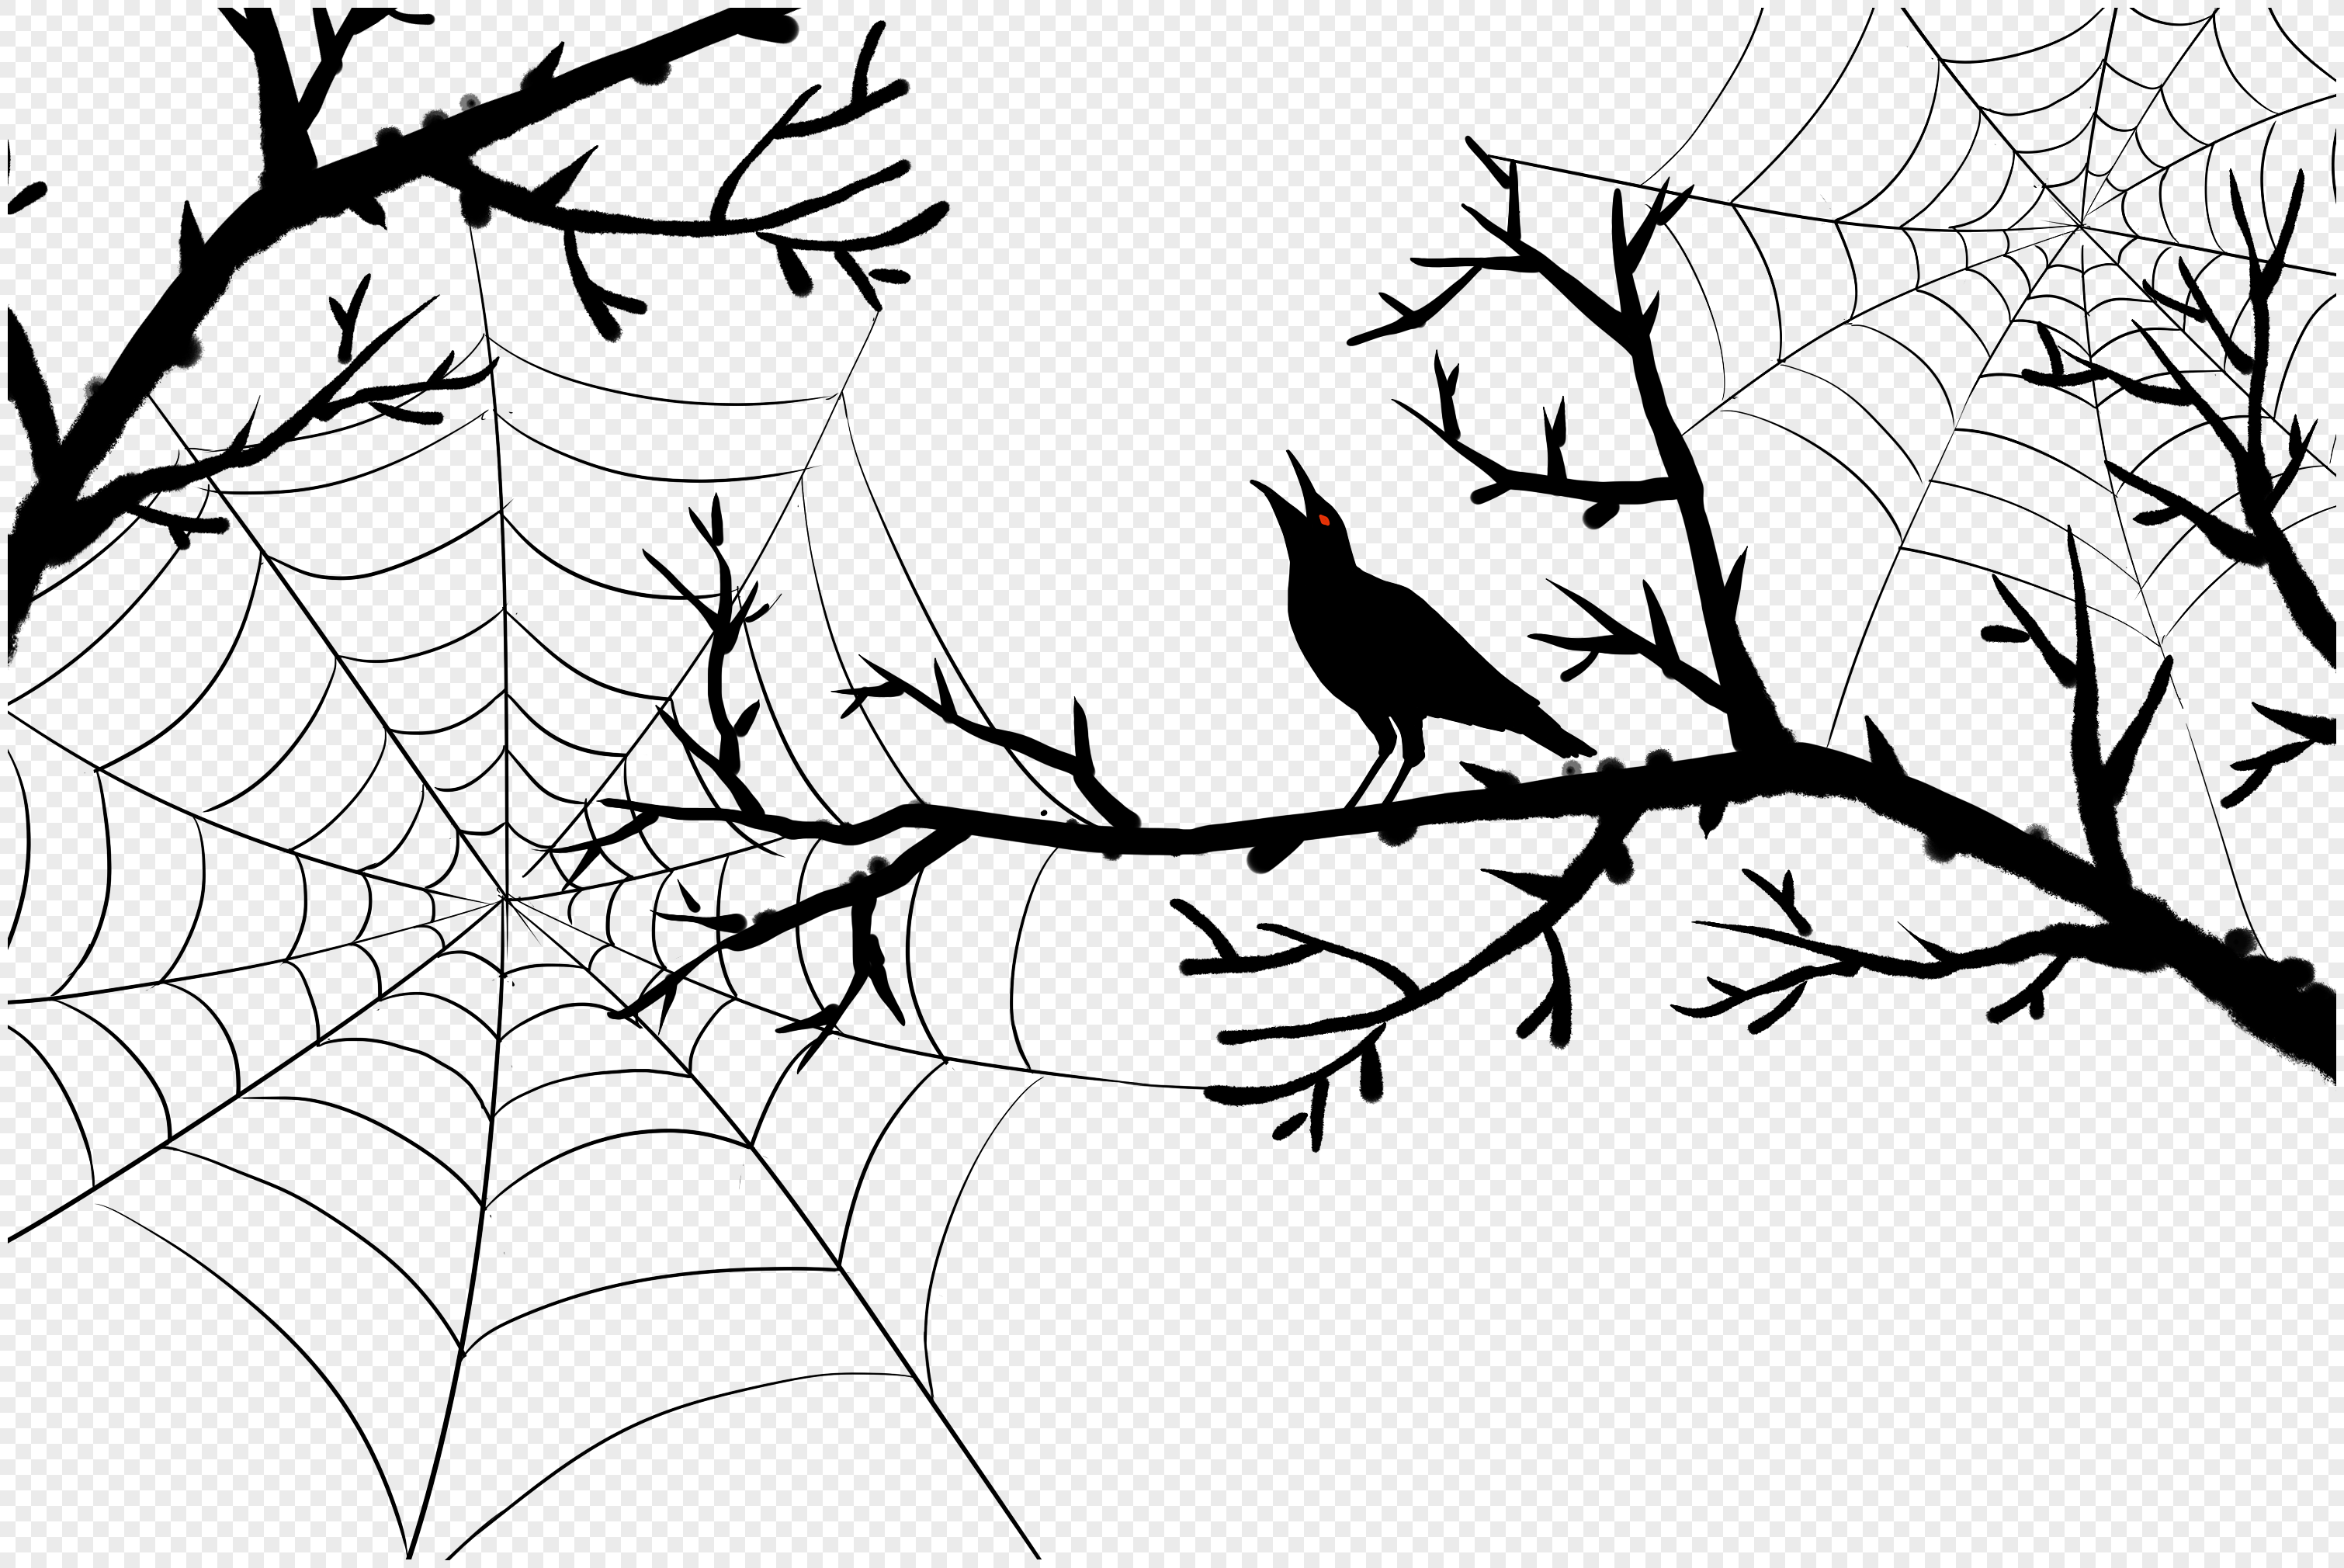 Spider web and crow silhouette on dead tree, tree, horror, dead tree png image free download